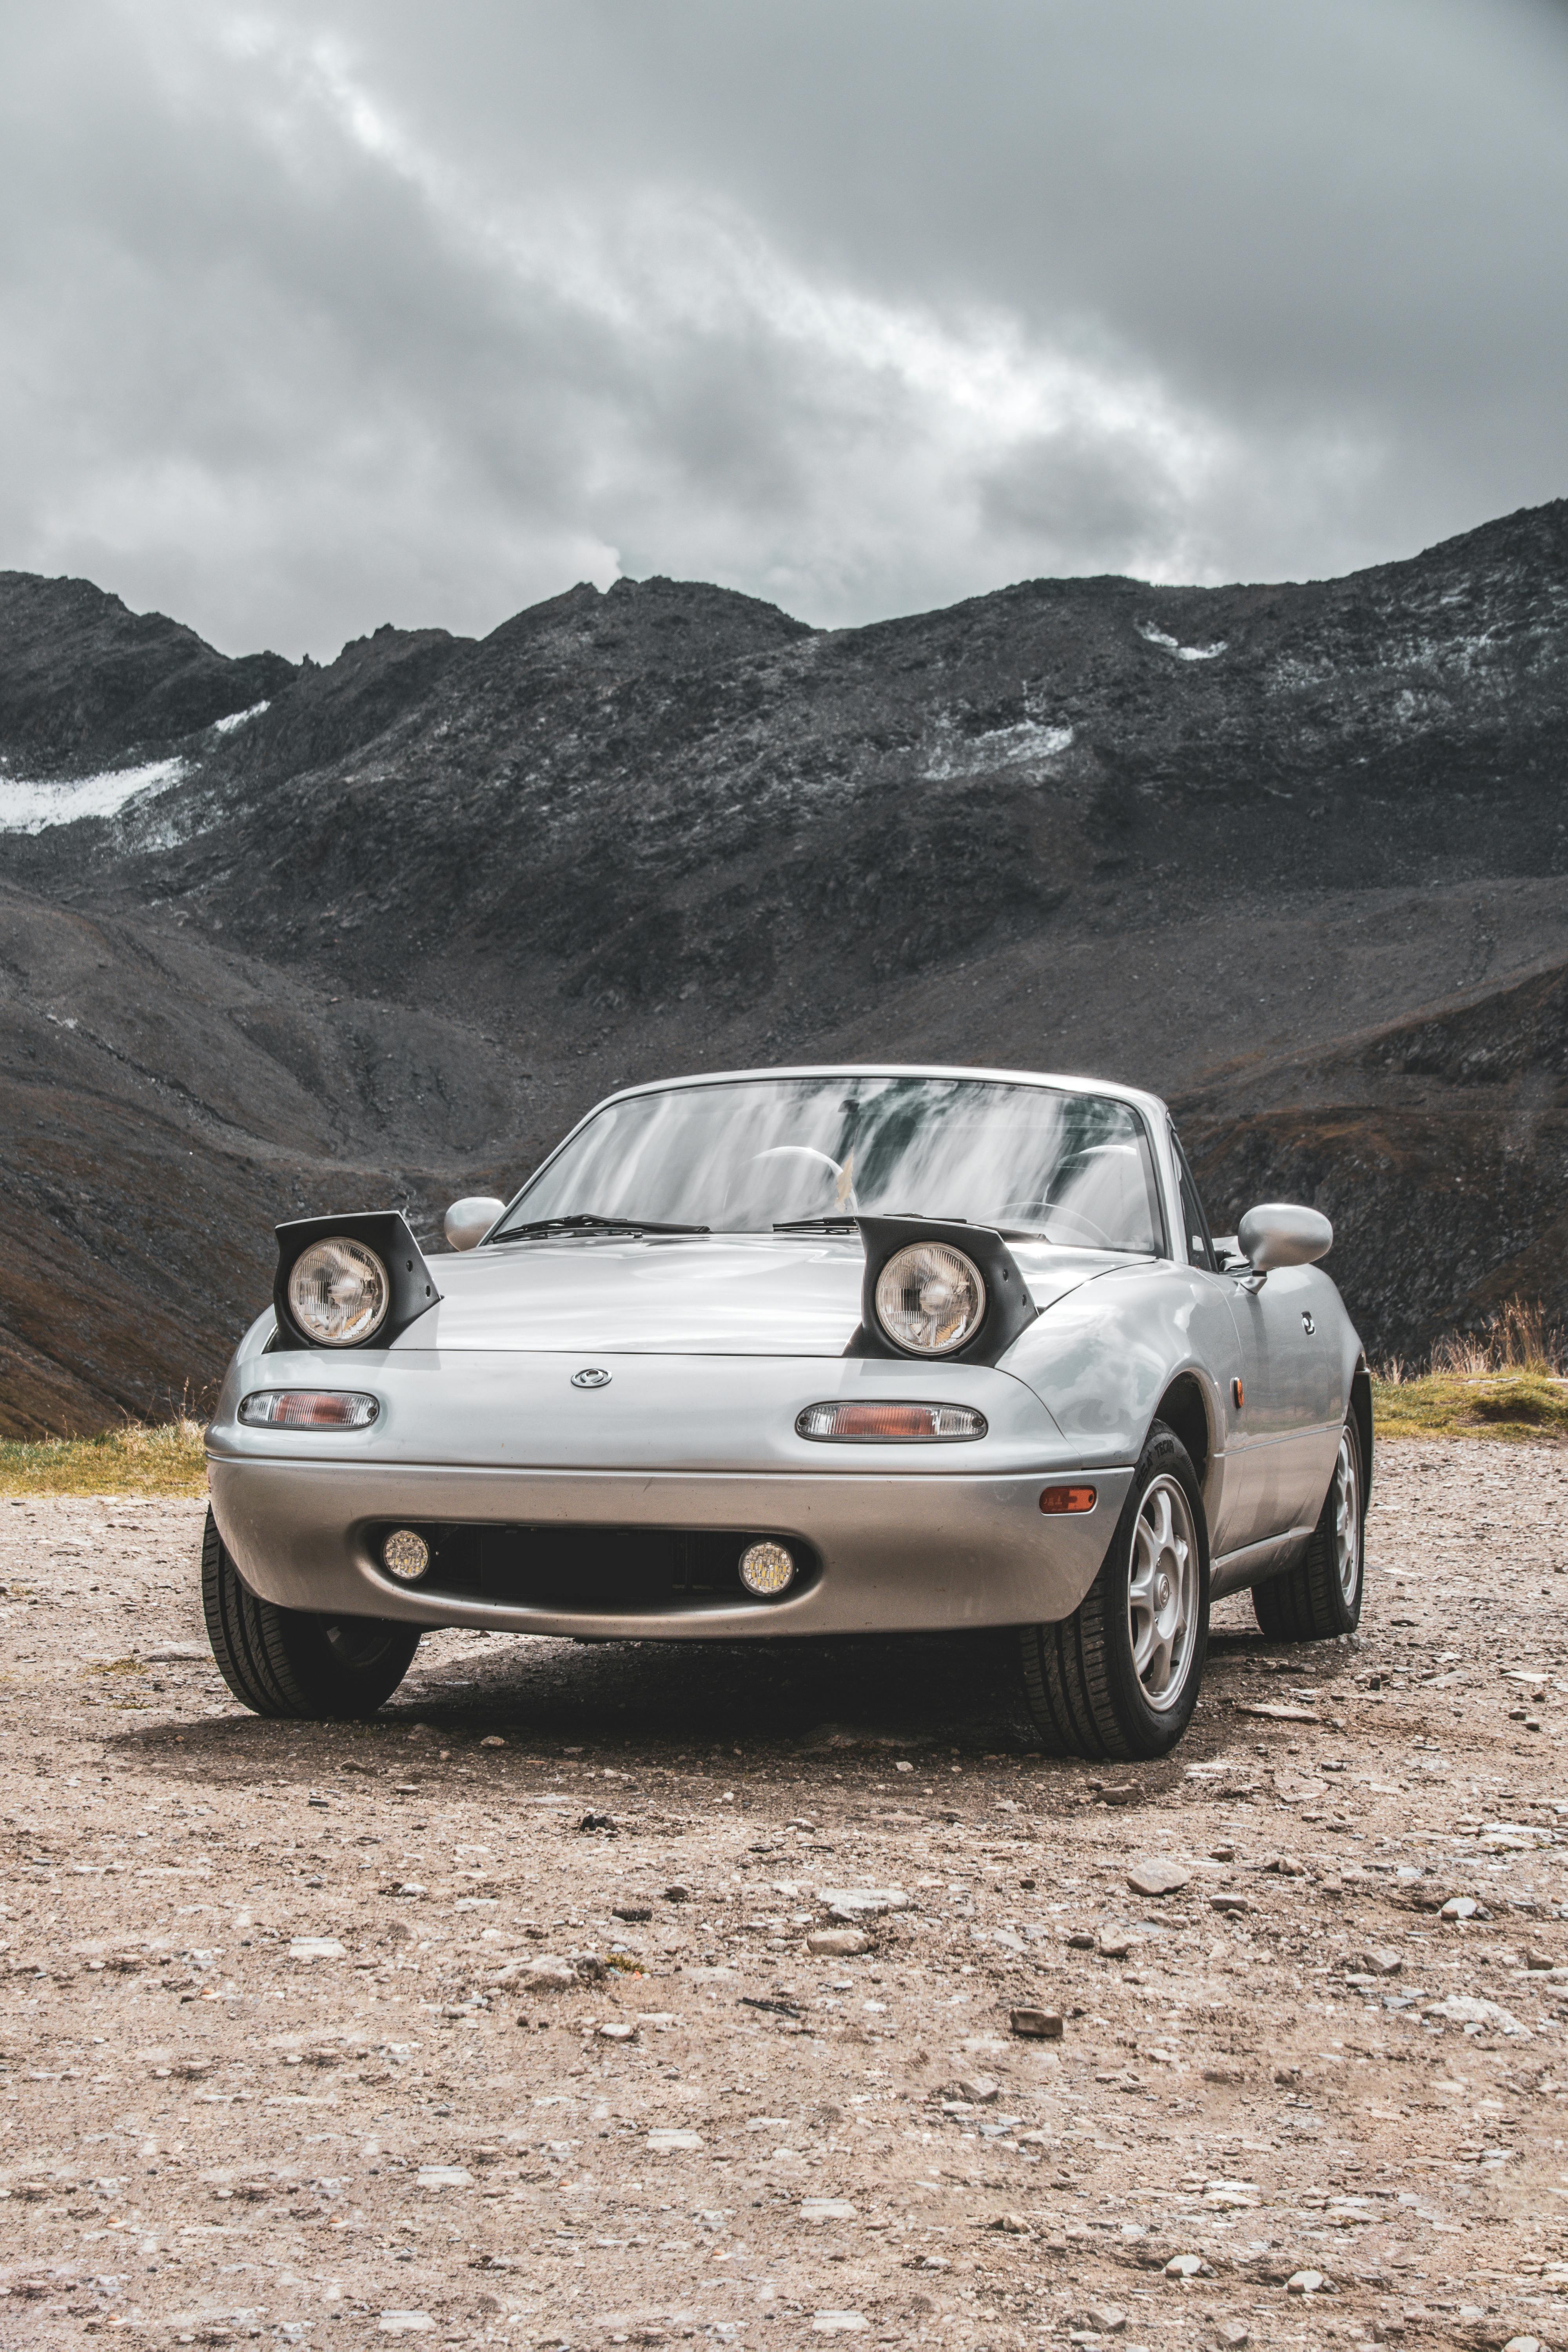 Mx5 Photos, Download The BEST Free Mx5 Stock Photos & HD Images